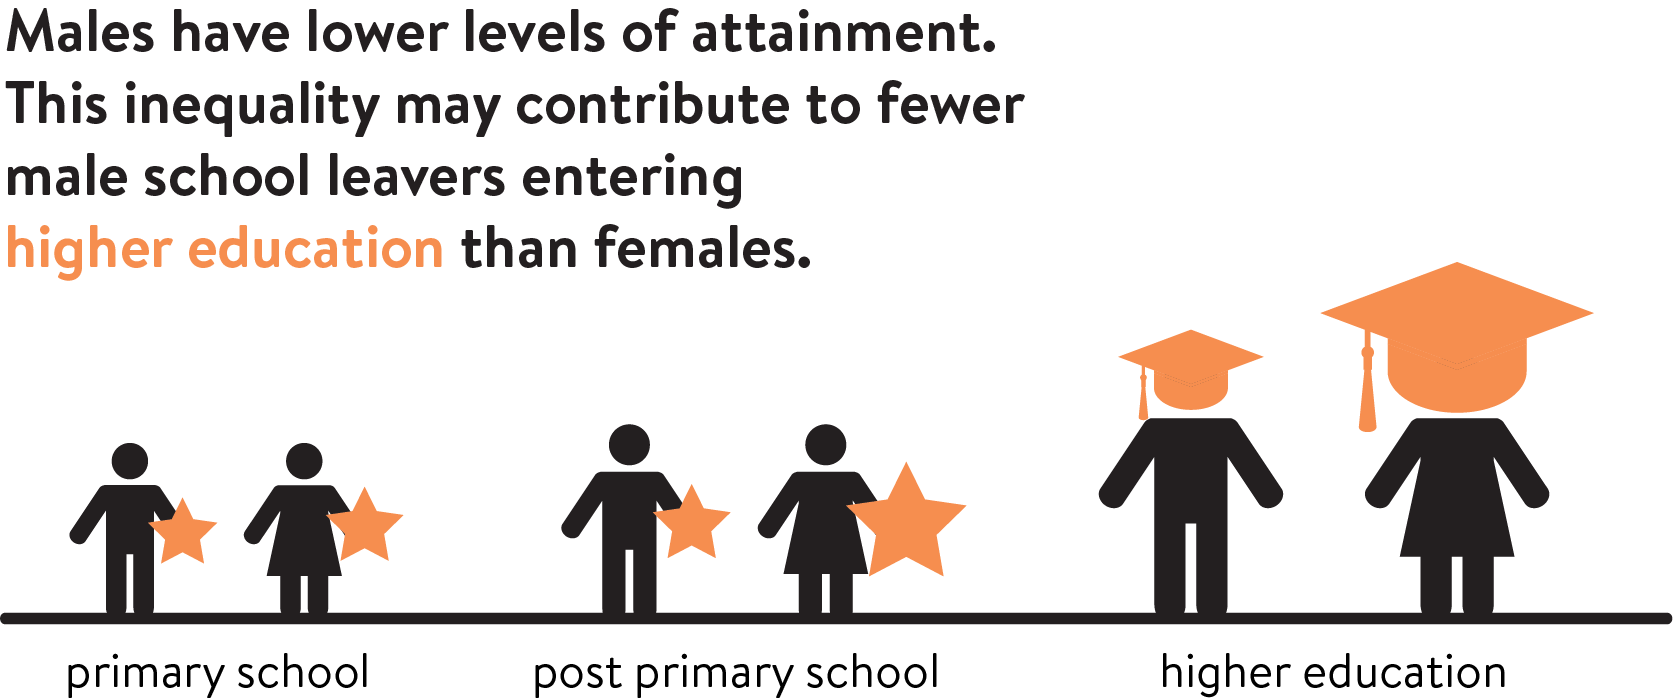 Males have lower levers of attainment